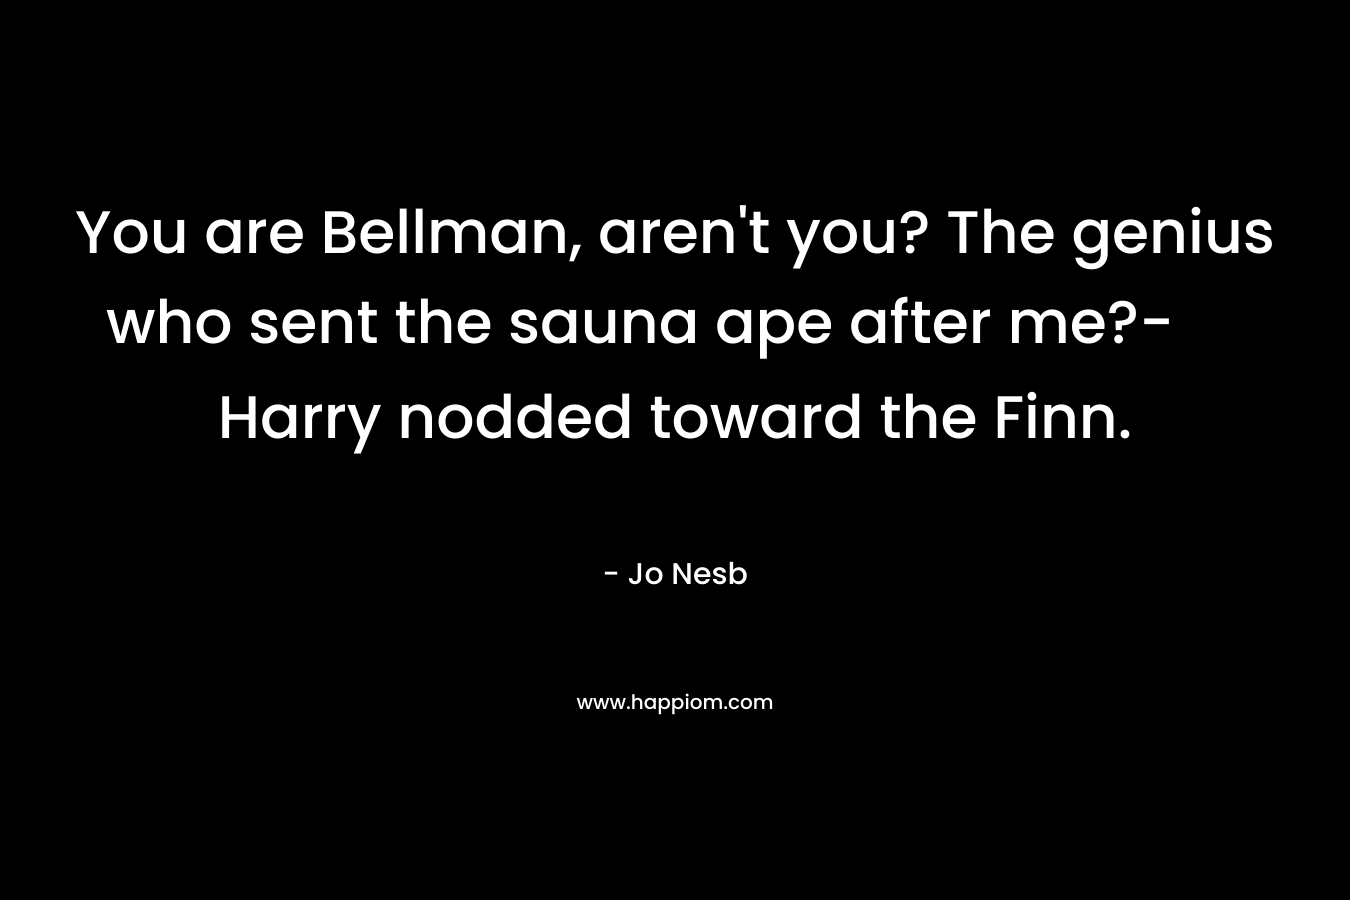 You are Bellman, aren't you? The genius who sent the sauna ape after me?- Harry nodded toward the Finn.